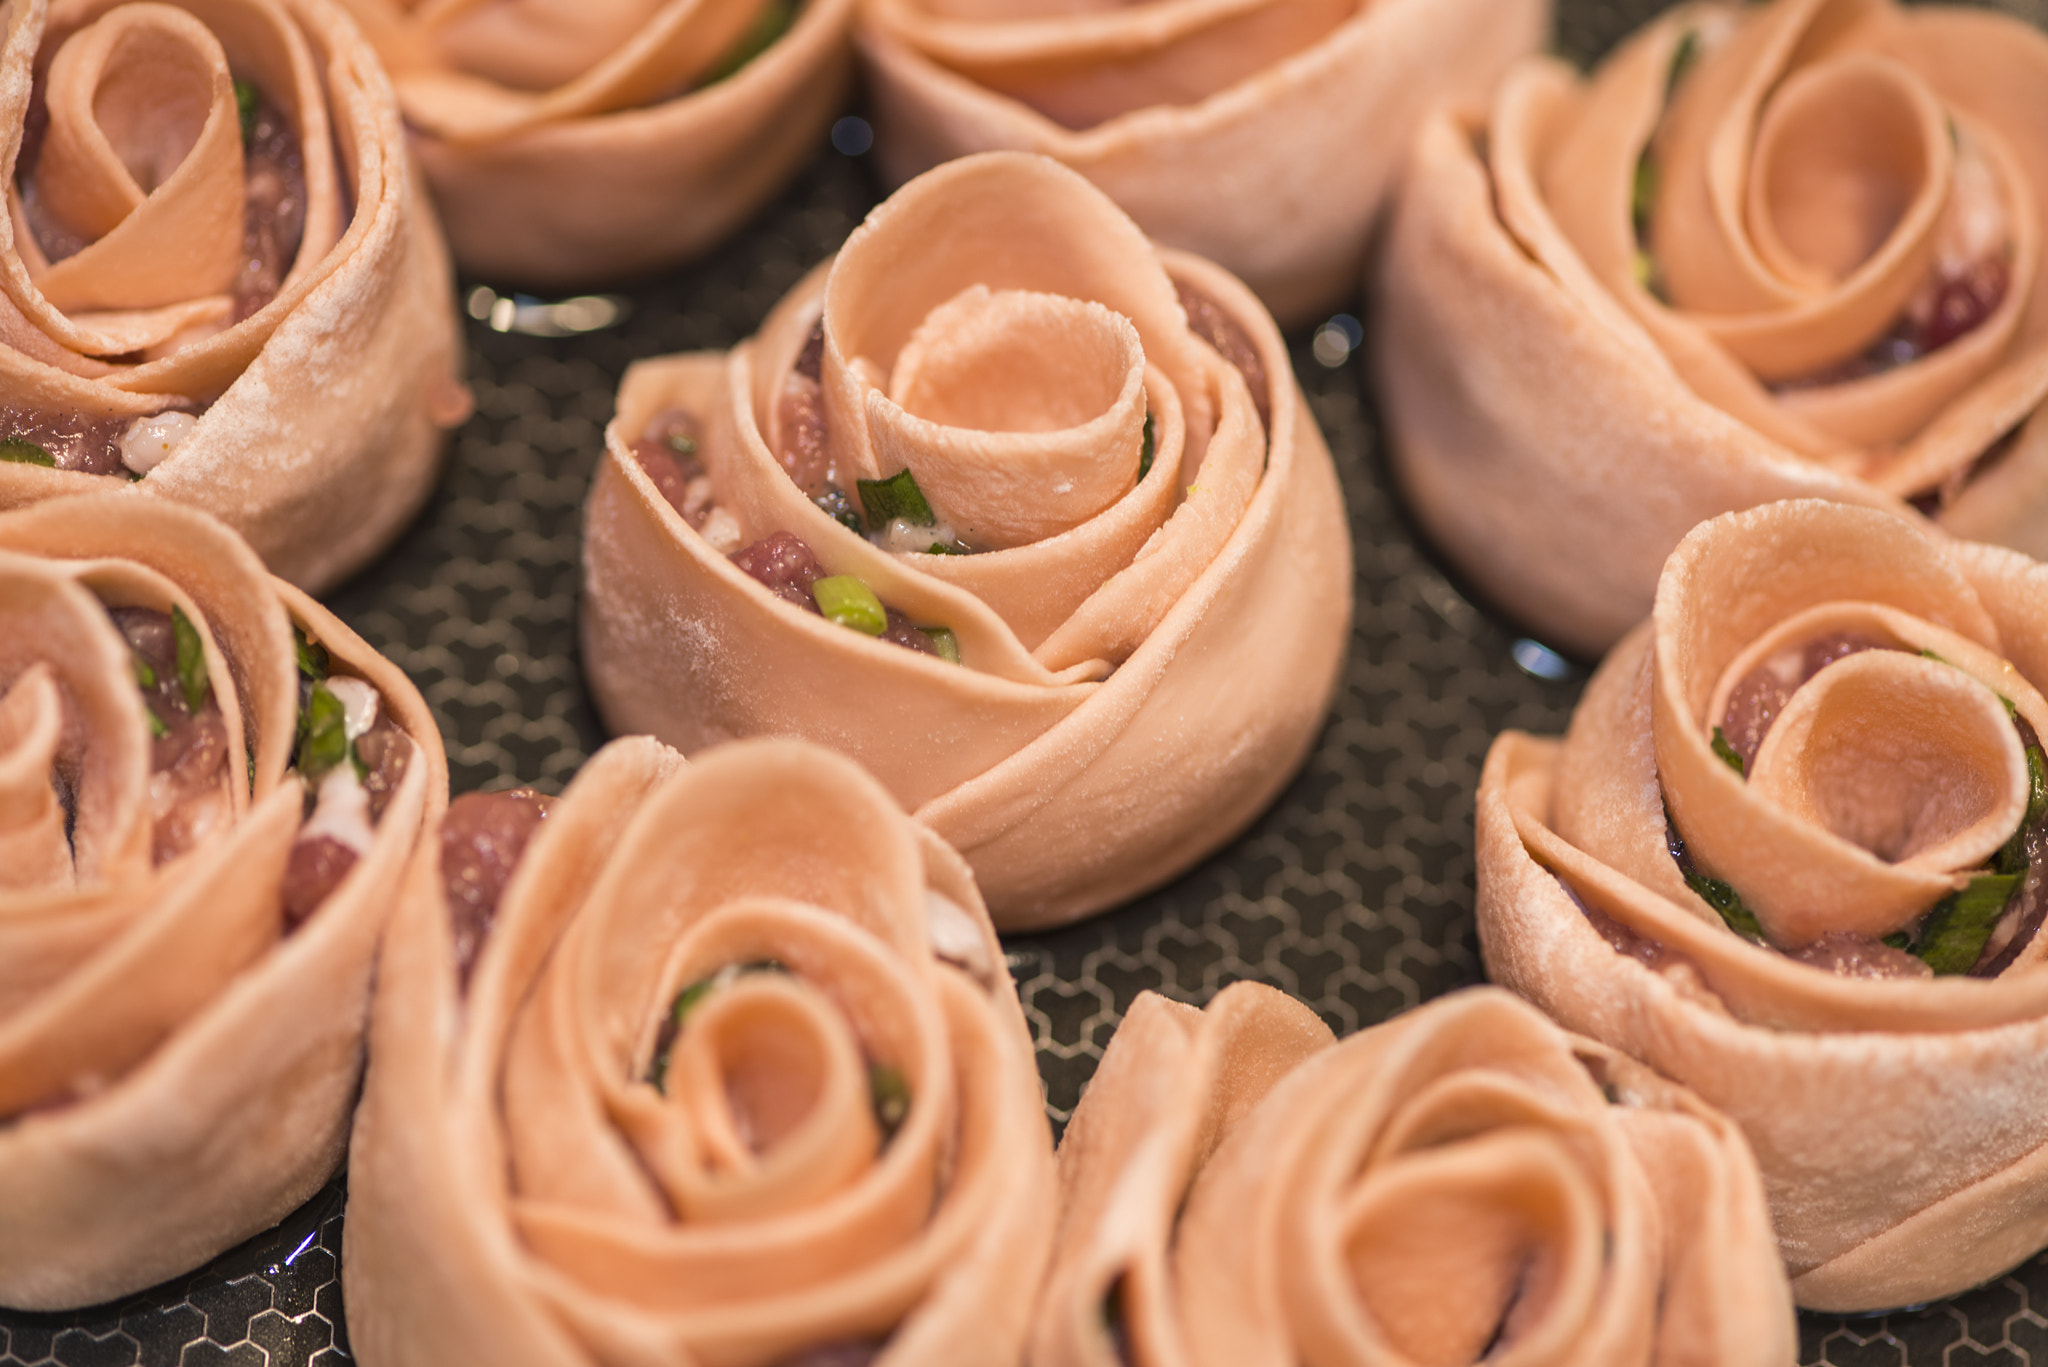 Nikon D800 sample photo. Chinese rose flower dumplings with mince inside photography